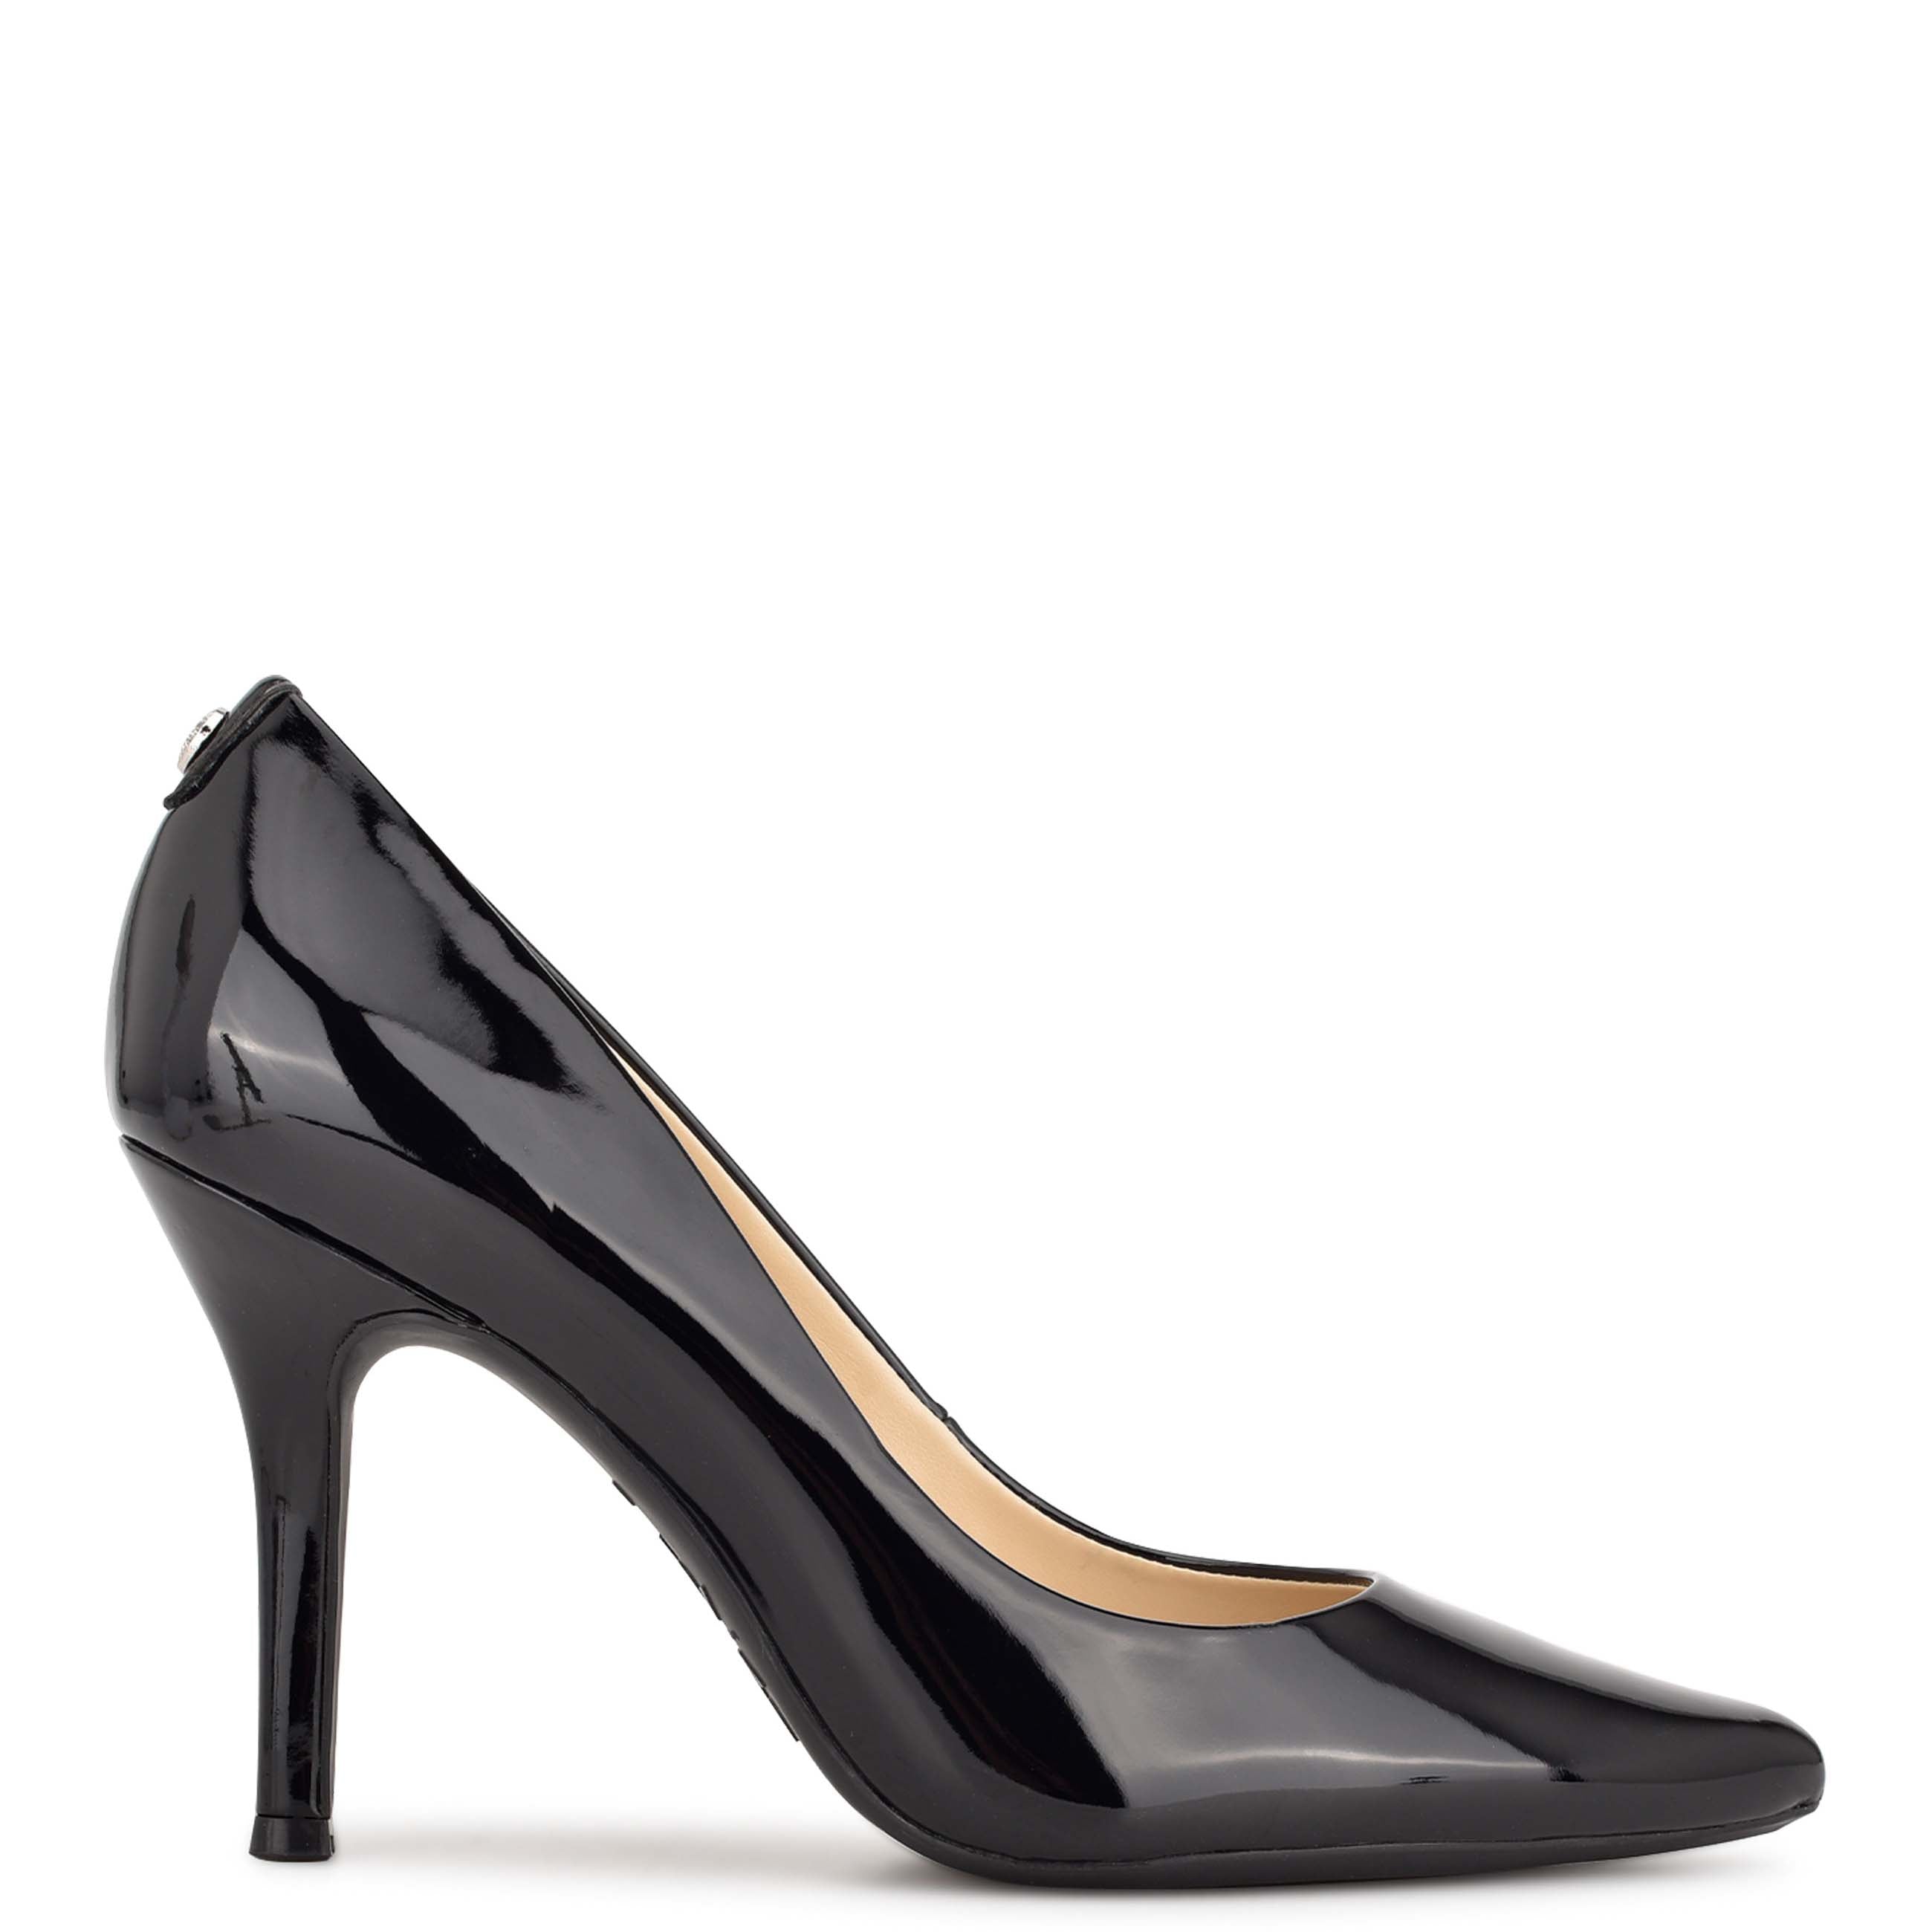 Fifth 9x9 Pointy Toe Pumps